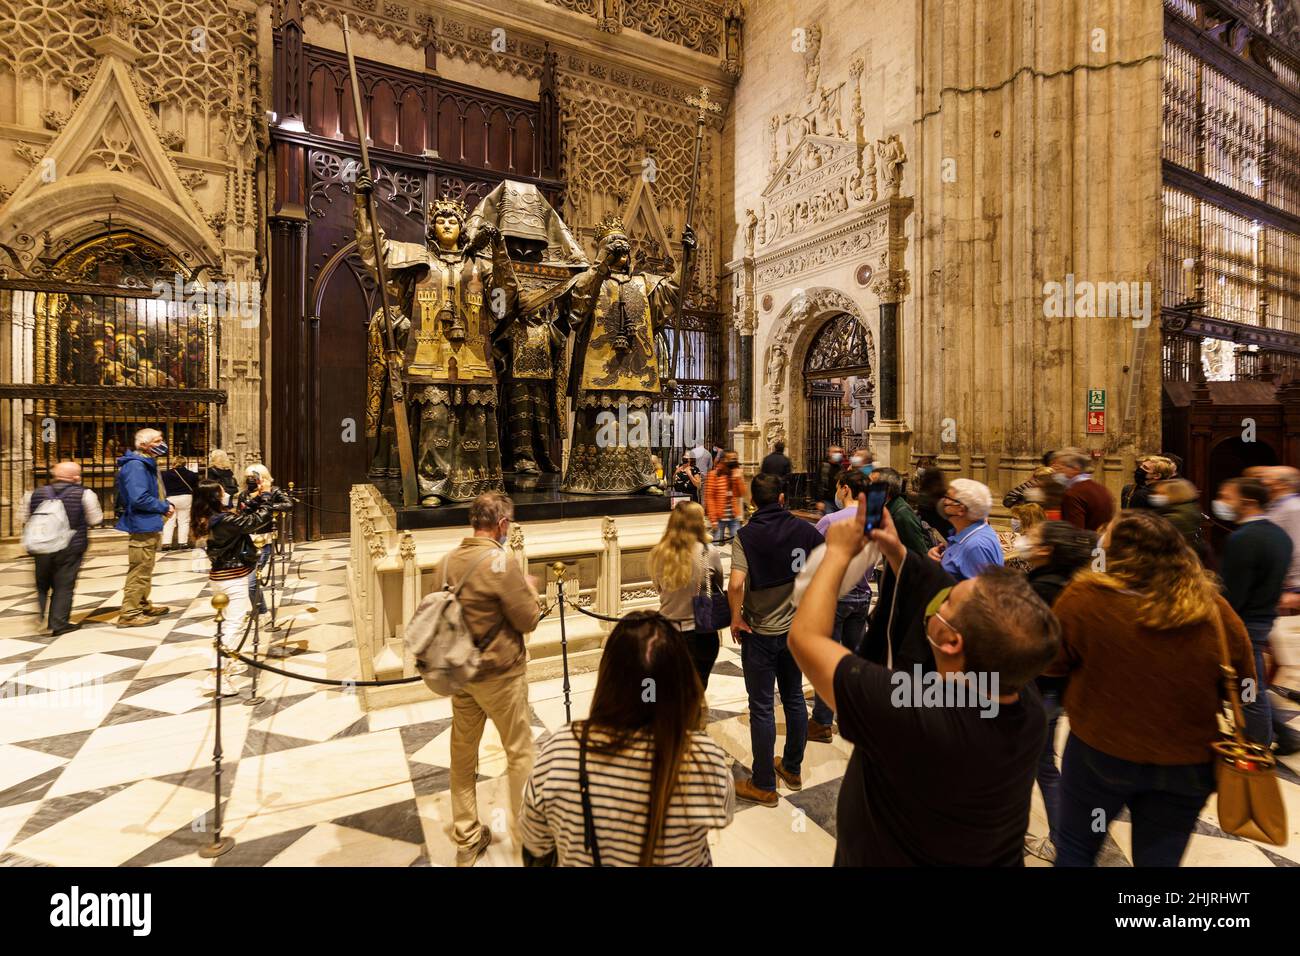 Seville, Spain - November 09 2021: Tourists take photo of the famous tomb of Christopher Columbus inside the impressive cathedral of Seville, aka the Stock Photo